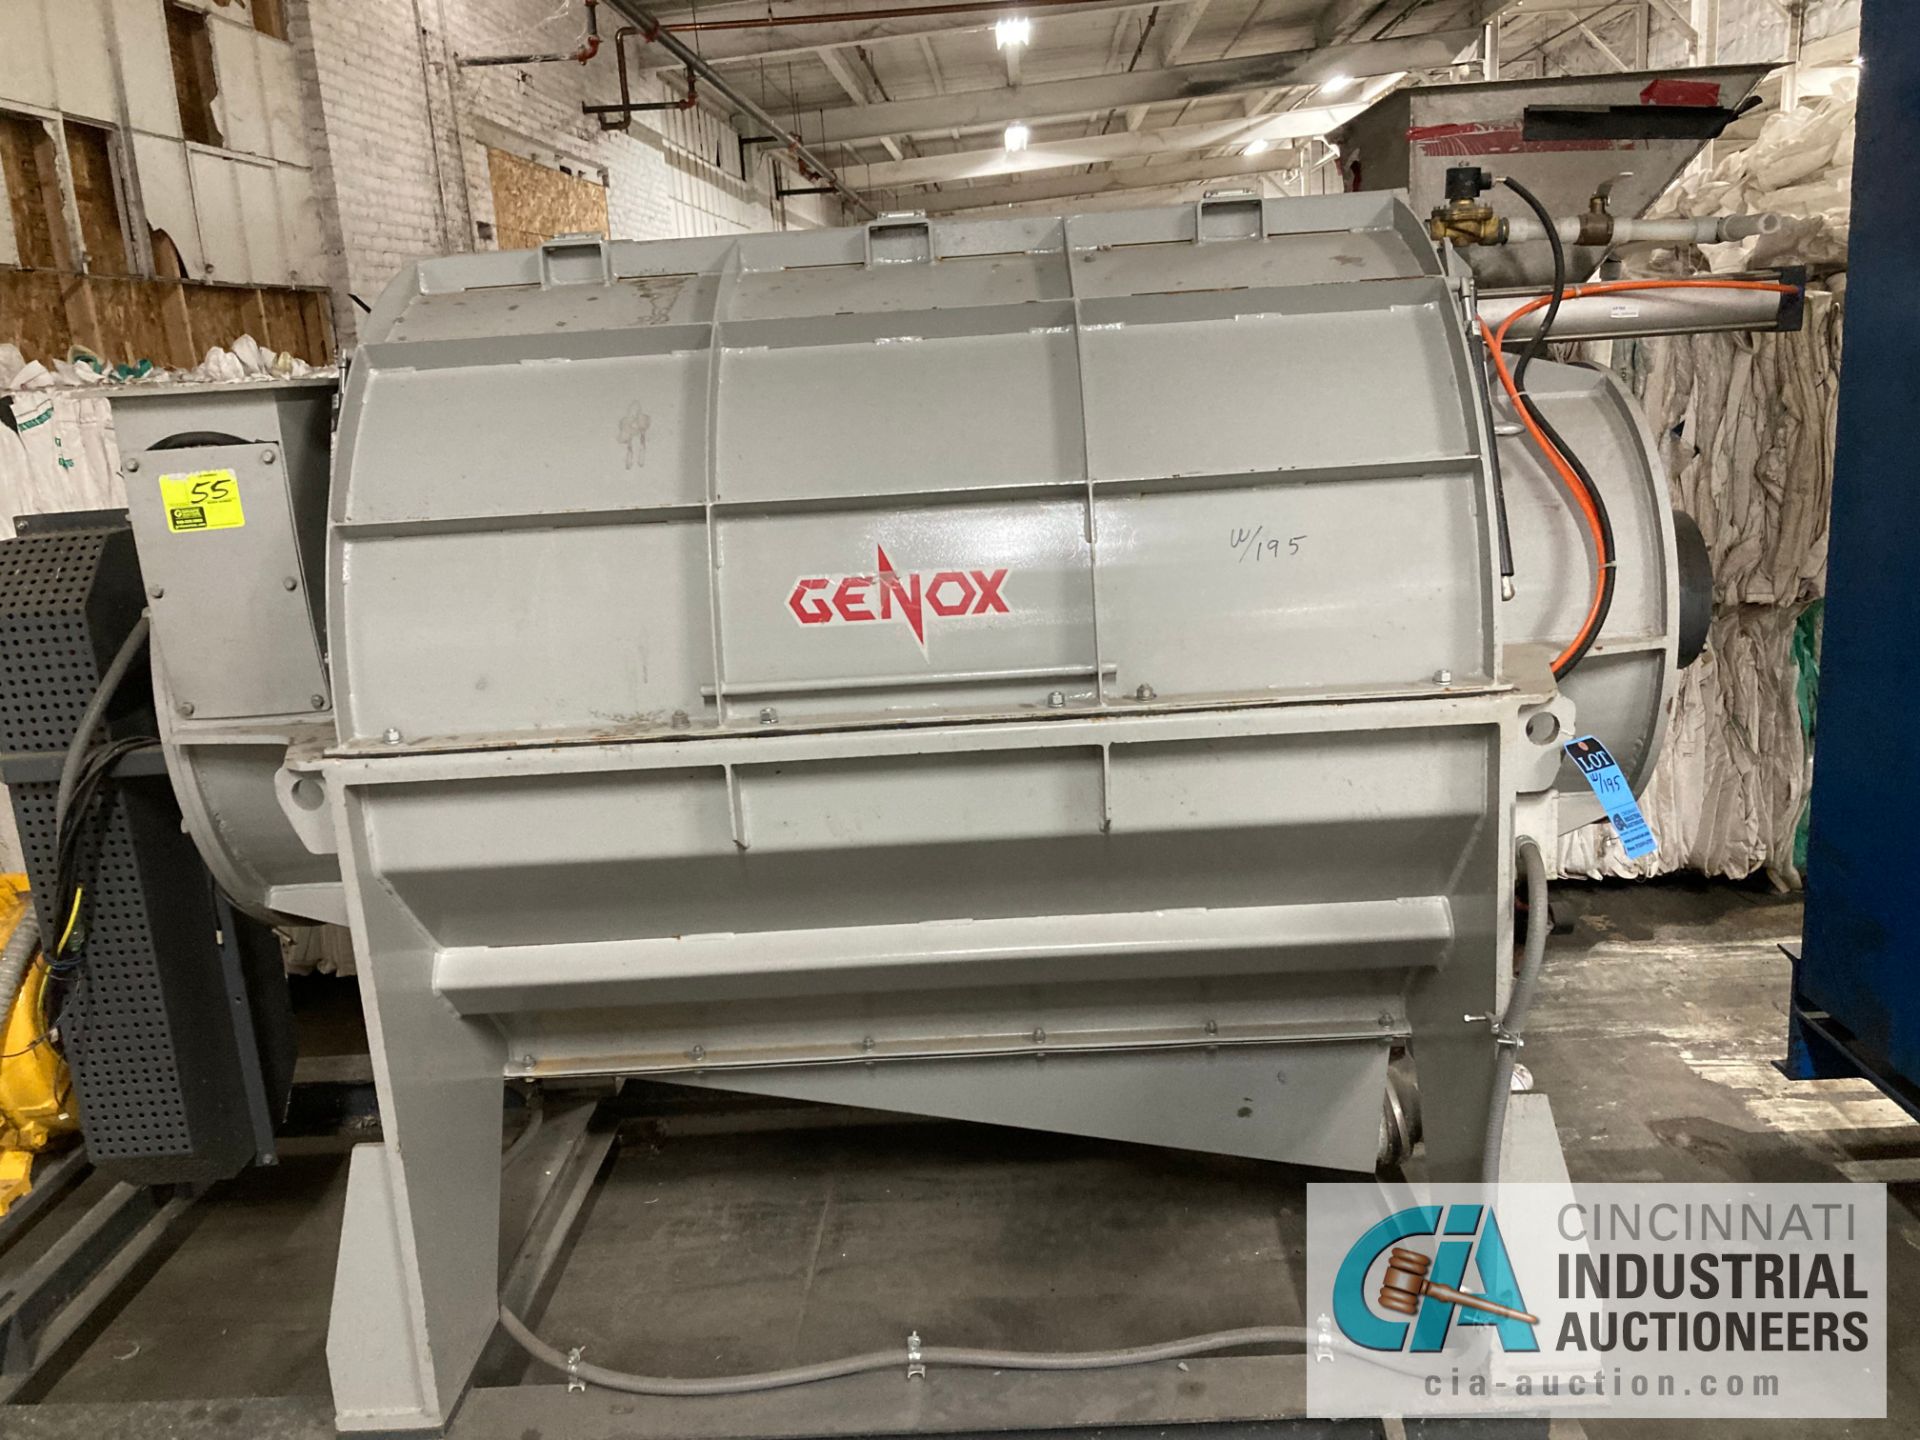 55 KW GENOX MODEL GS650-2 CENTRIFUGAL DRYER; S/N 161201650-2-KY5, 48" DIAMETER X 50", WITH CONTROL - Image 4 of 6